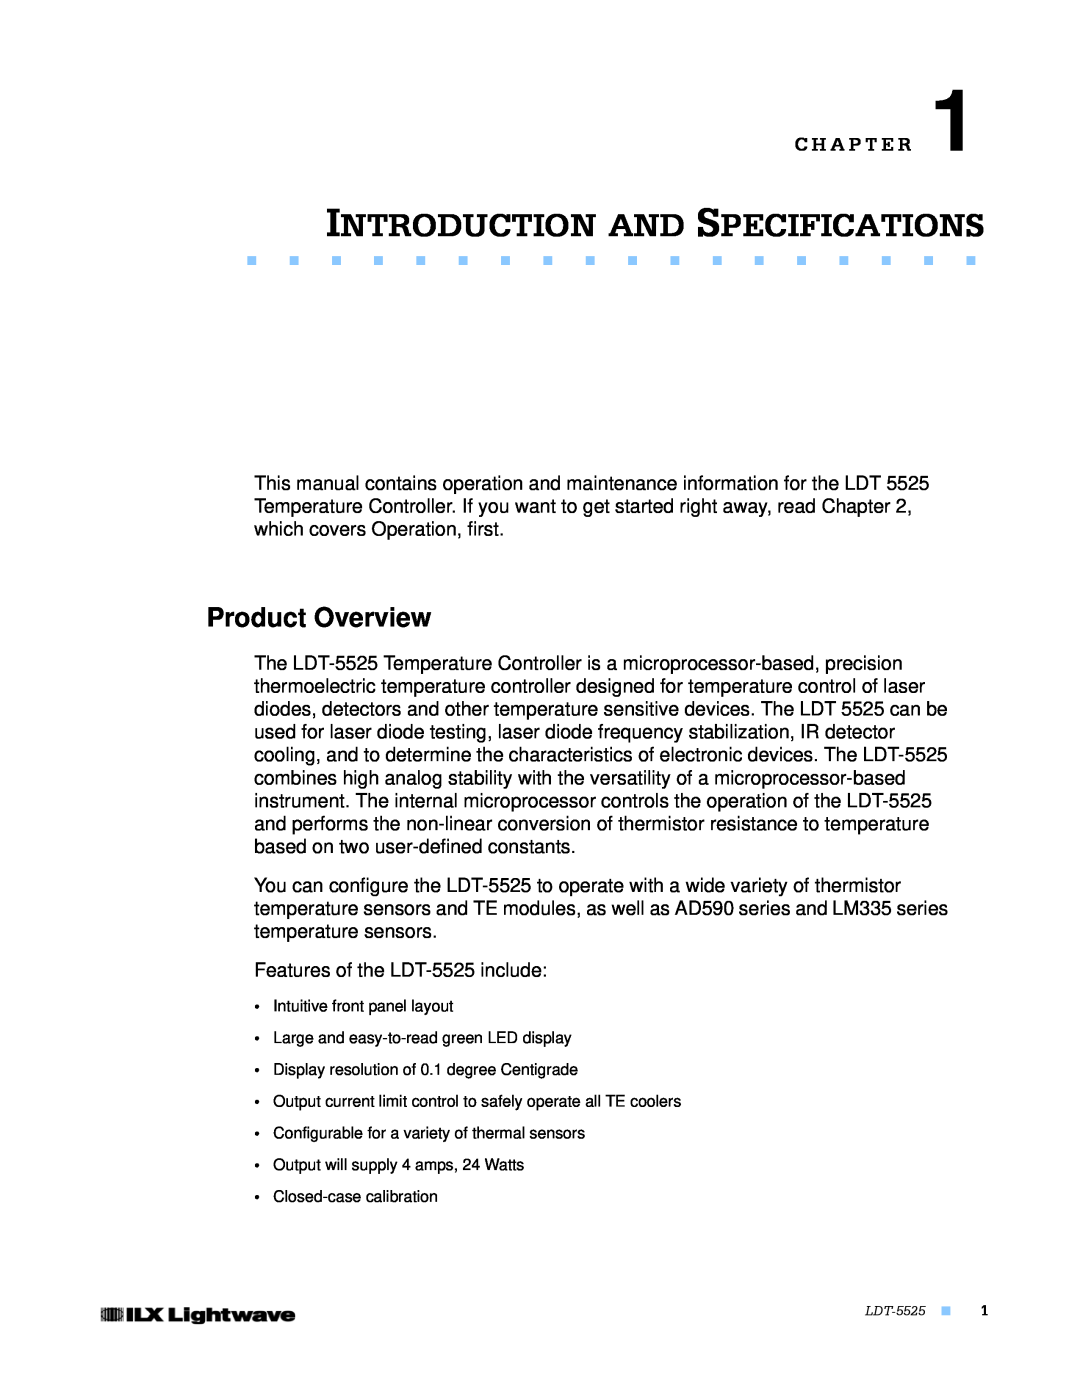 Lightwave Communications LDT-5525 manual Introduction And Specifications, Product Overview, C H A P T E R 